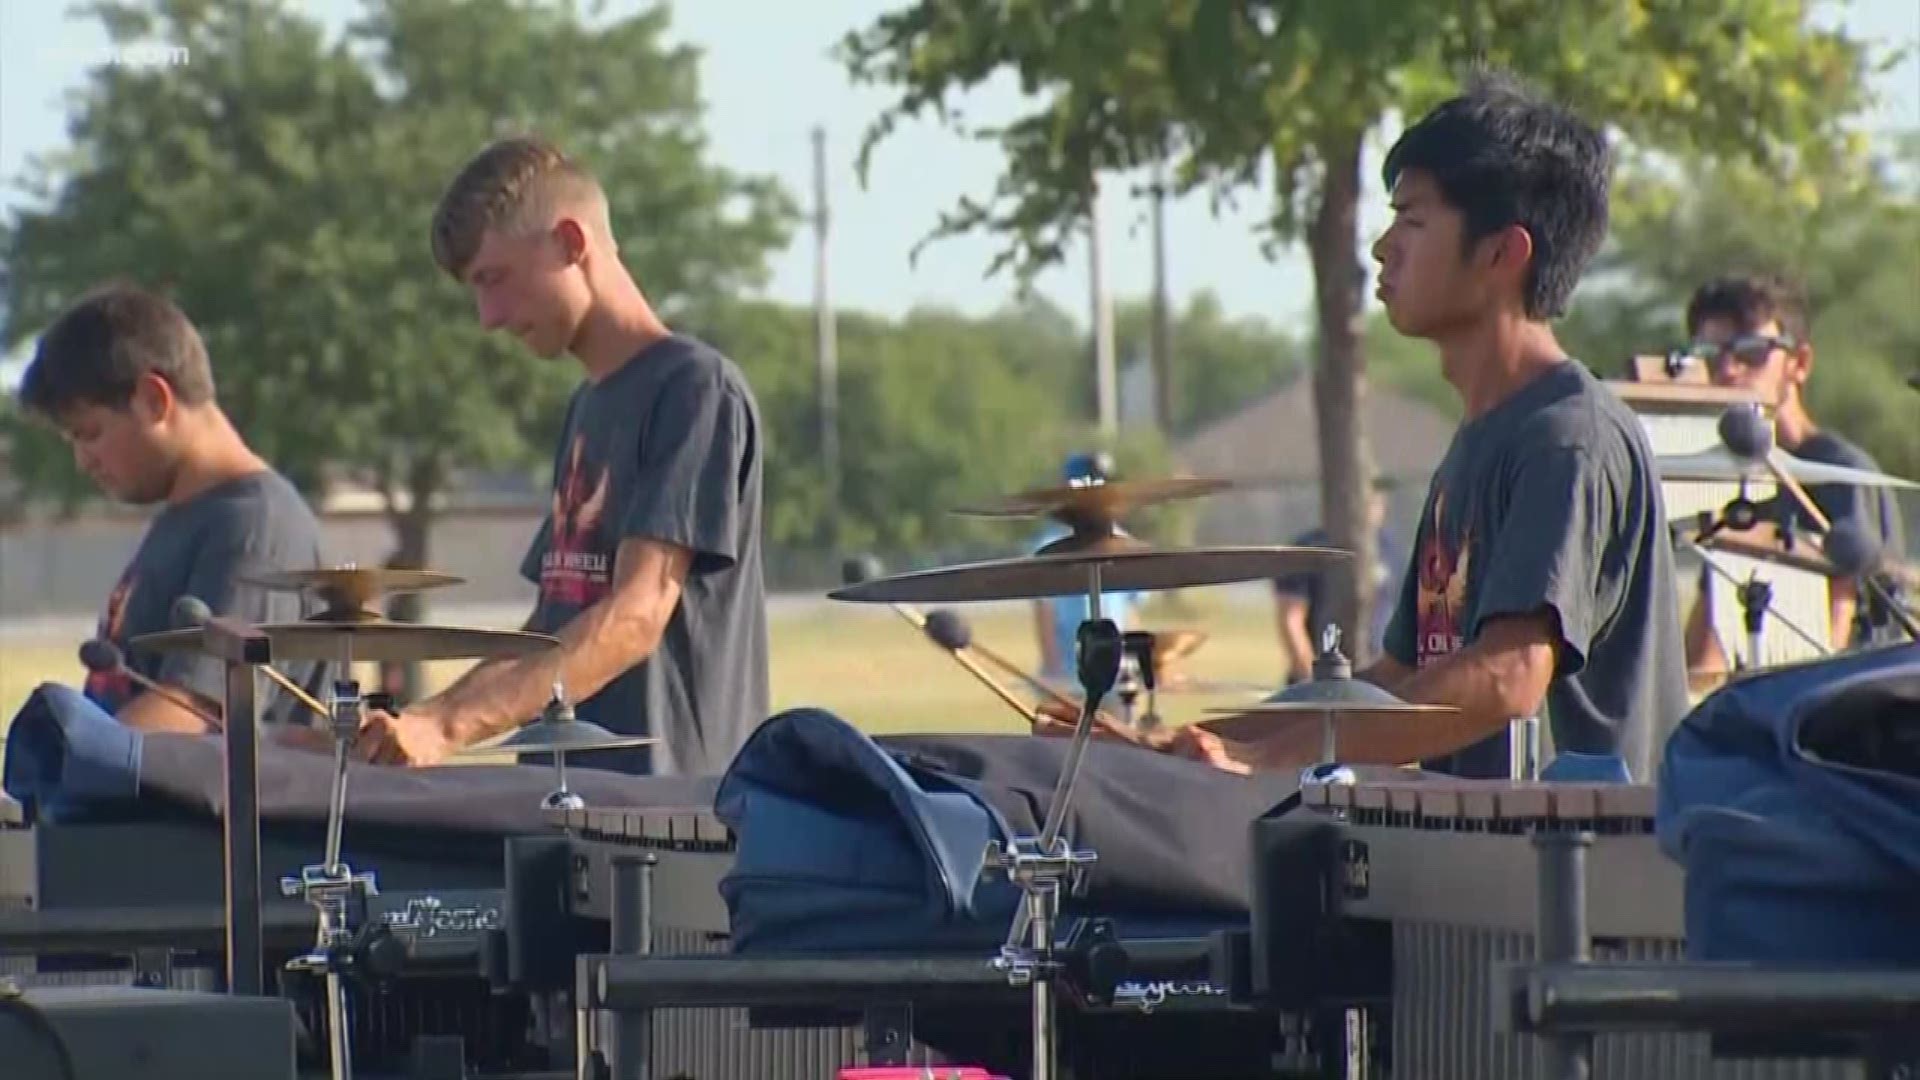 Drum corps performance under sweltering sun